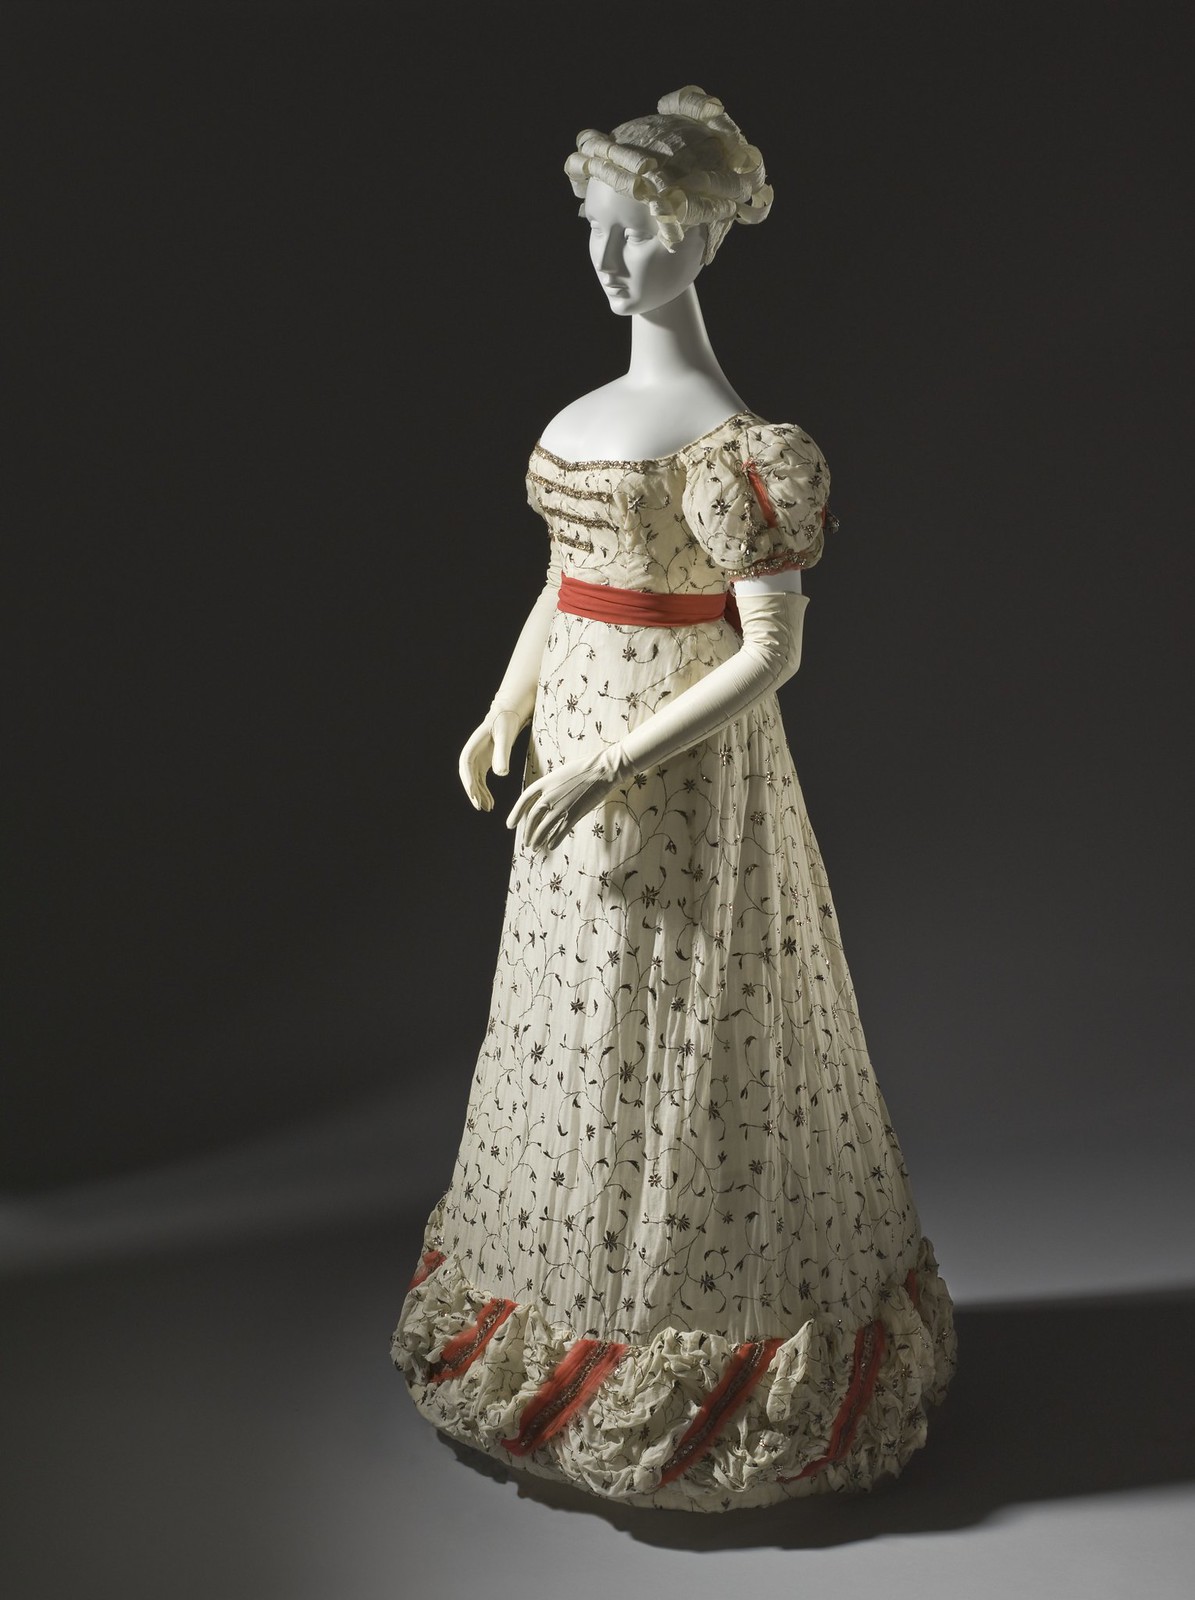 1820 Ball gown. British. Cotton plain weave with metallic thread embroidery and silk ribbons with metallic passementerie and tassels. LACMA